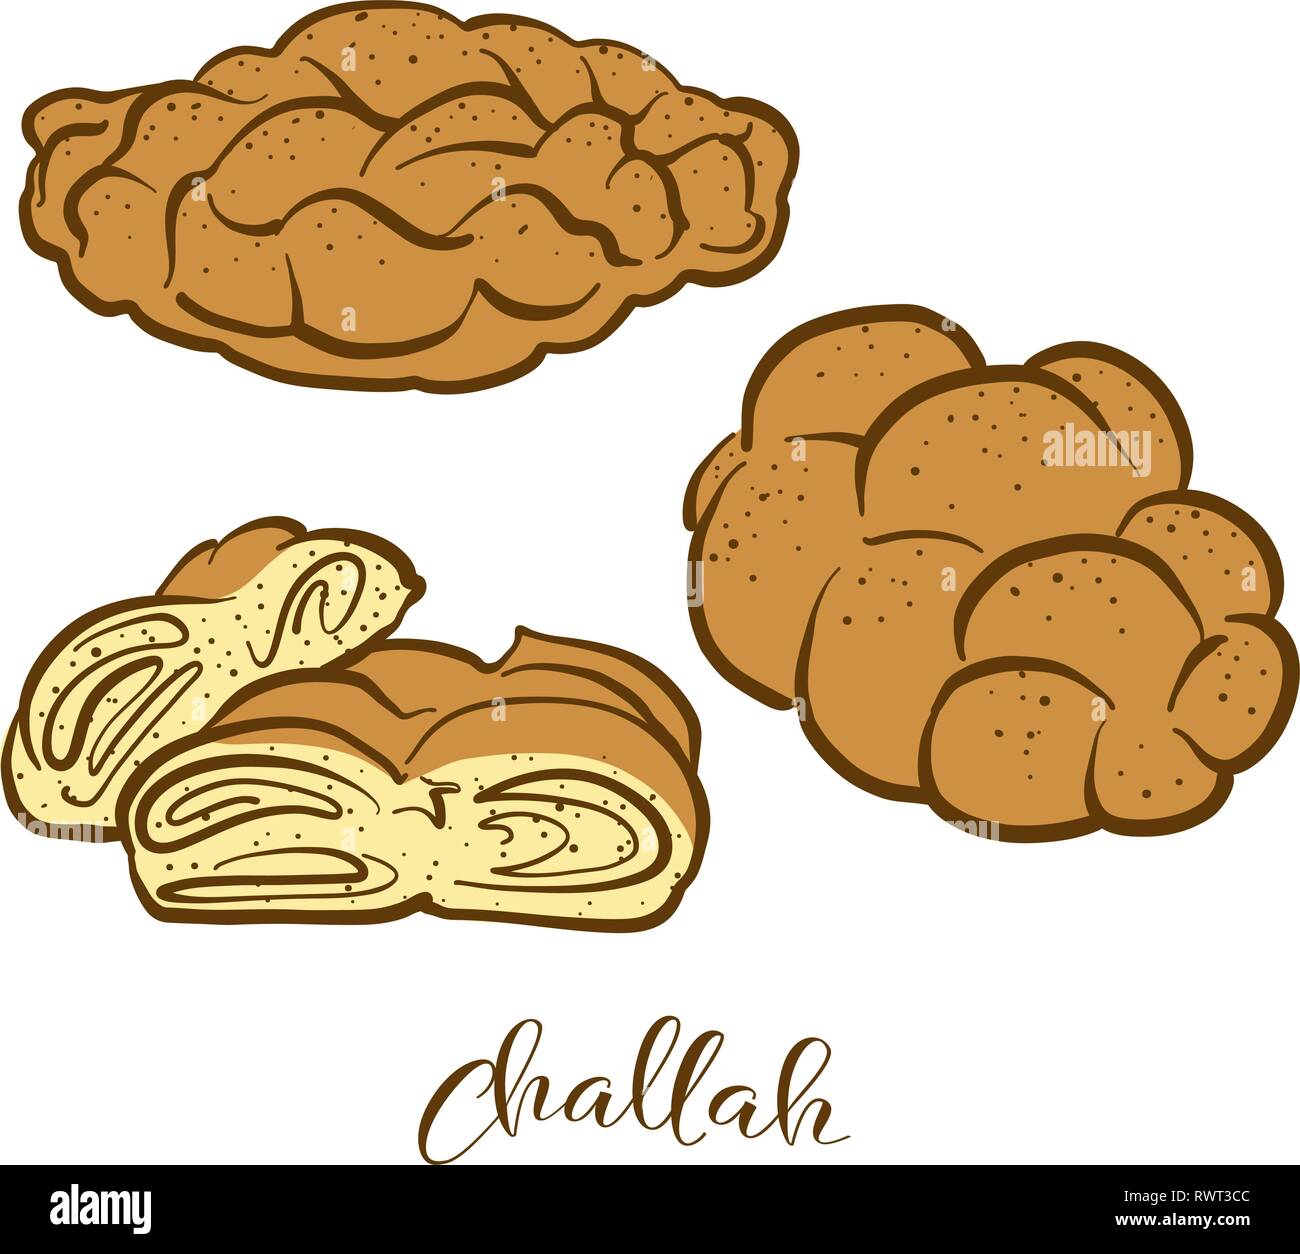 Colored sketches of Challah bread. Vector drawing of Leavened food, usually known in Poland and Israel. Colored Bread illustration series. Stock Vector